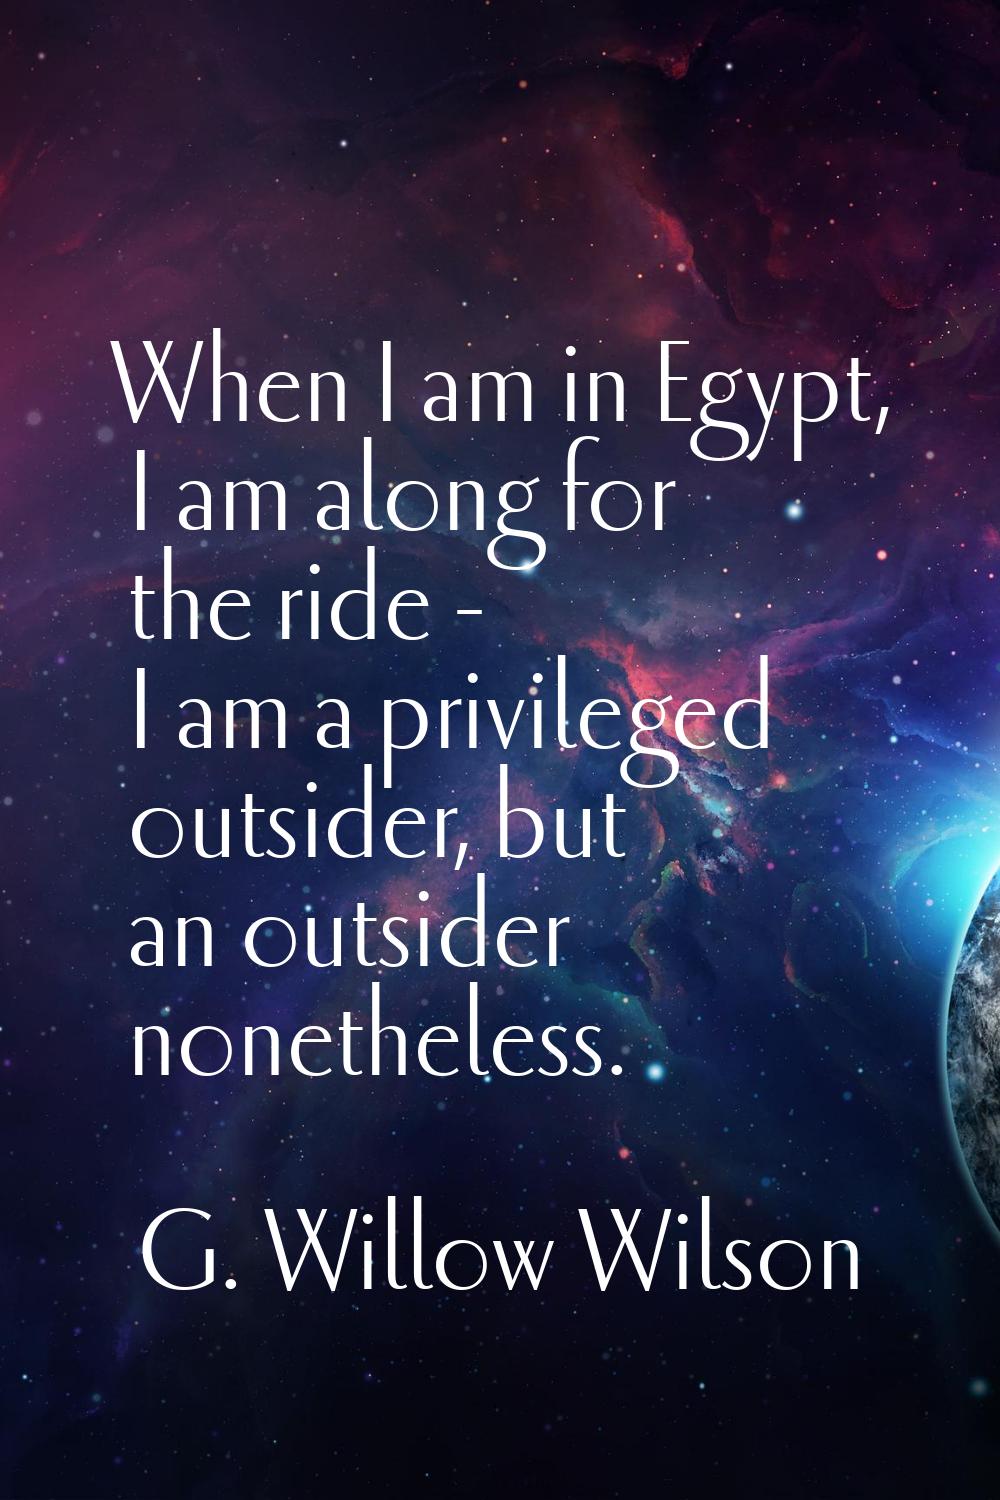 When I am in Egypt, I am along for the ride - I am a privileged outsider, but an outsider nonethele